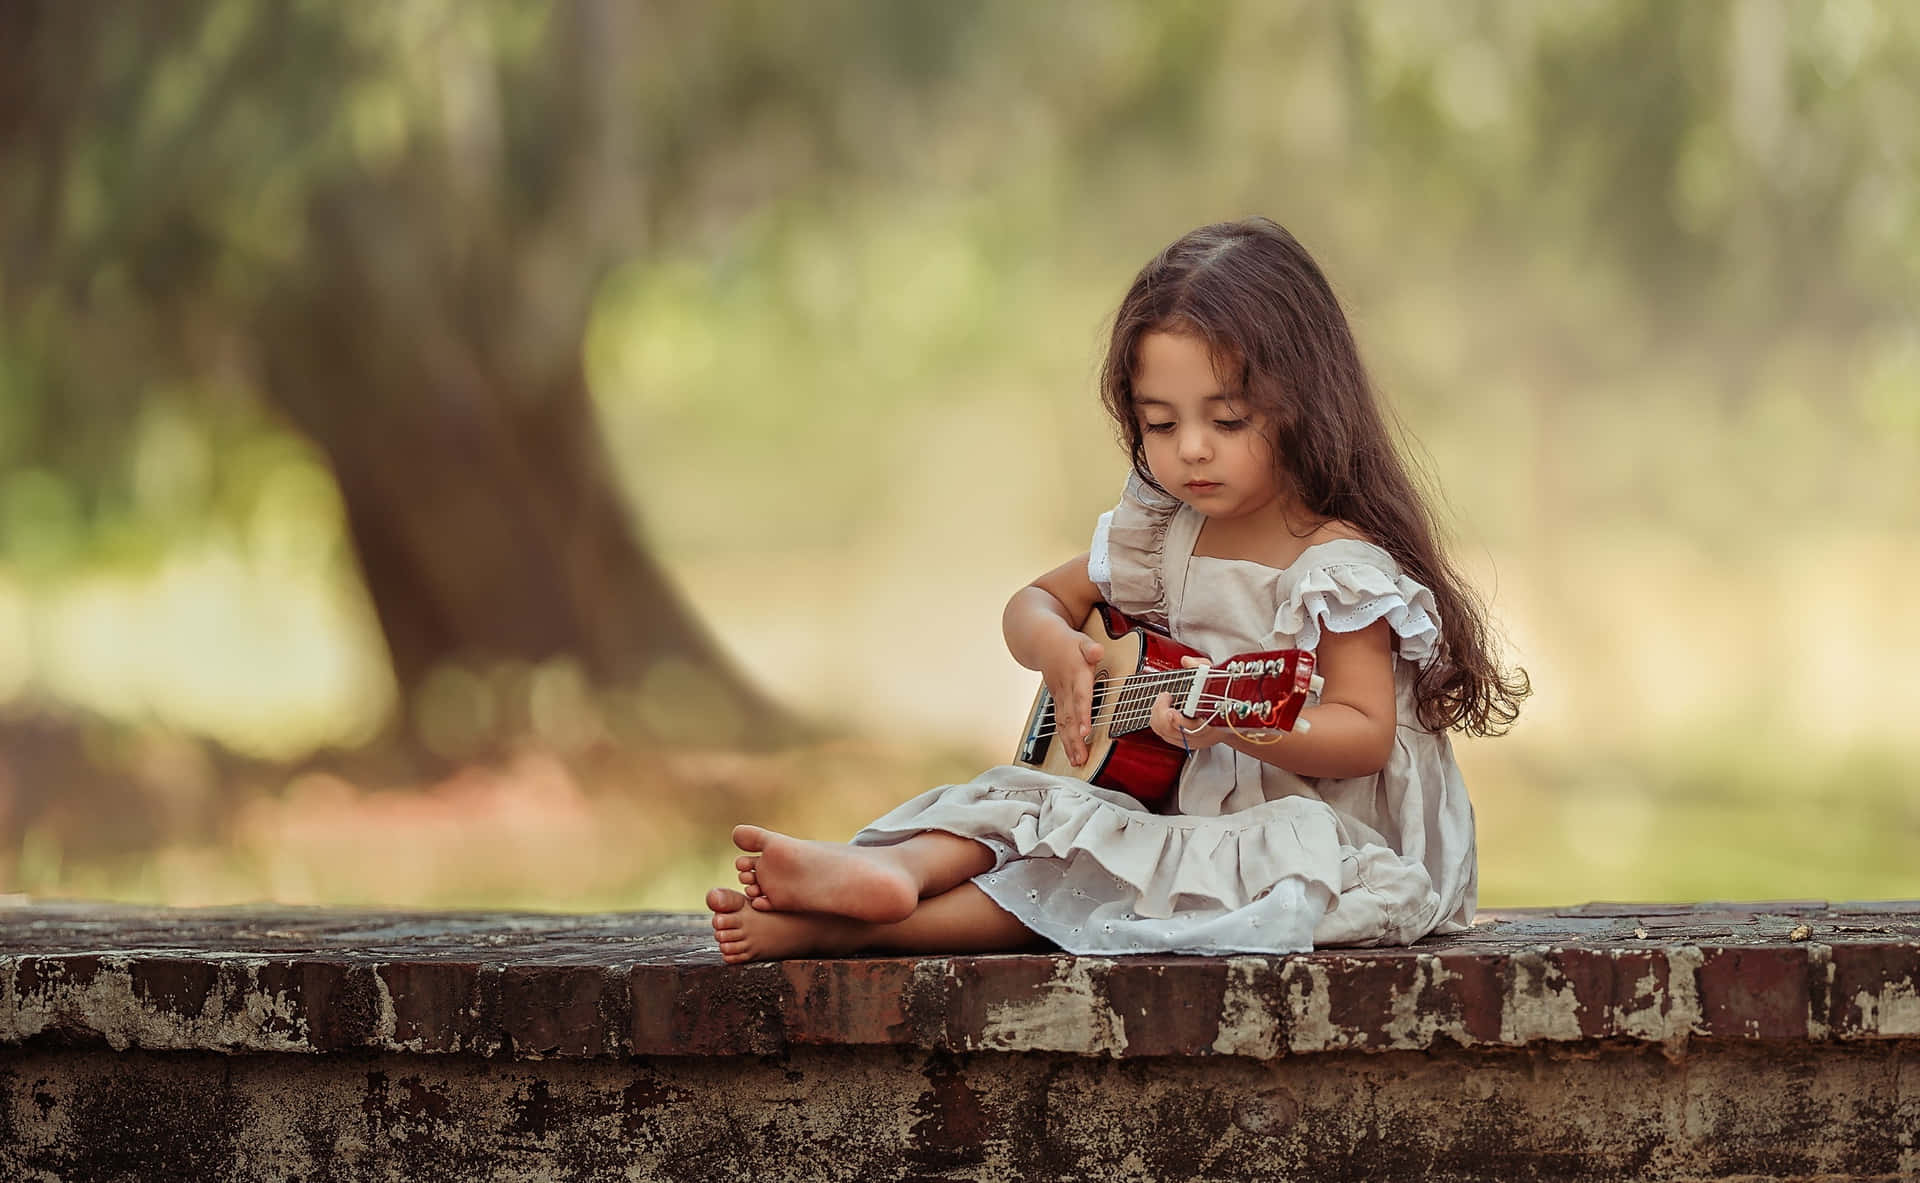 A Little Girl Sitting On A Brick Wall Playing A Guitar